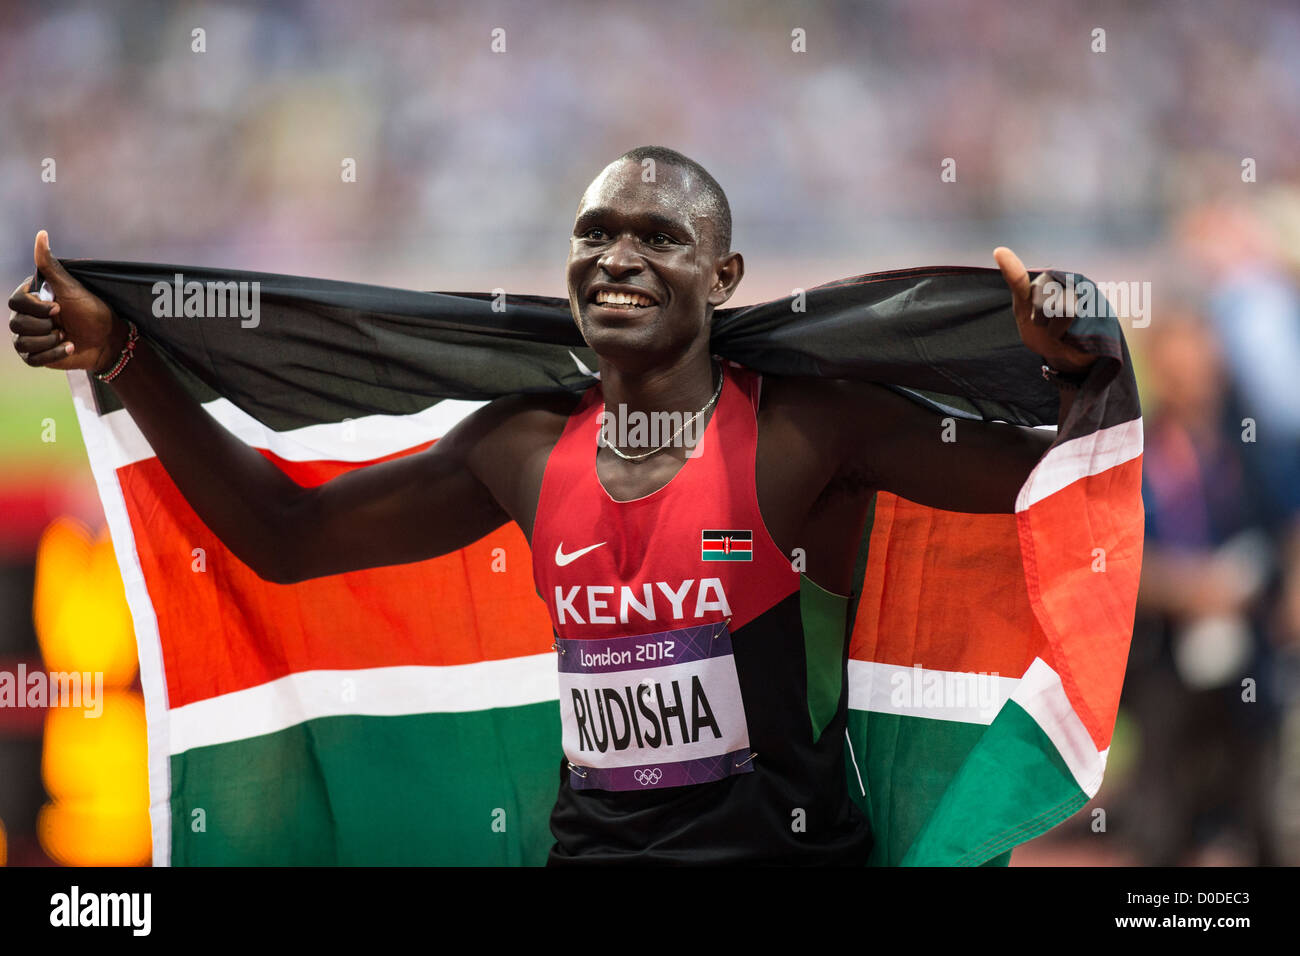 David Rudisha (KEN) winning the gold medal in world record time in the Men's 800m at the Olympic Summer Games, London 2012 Stock Photo